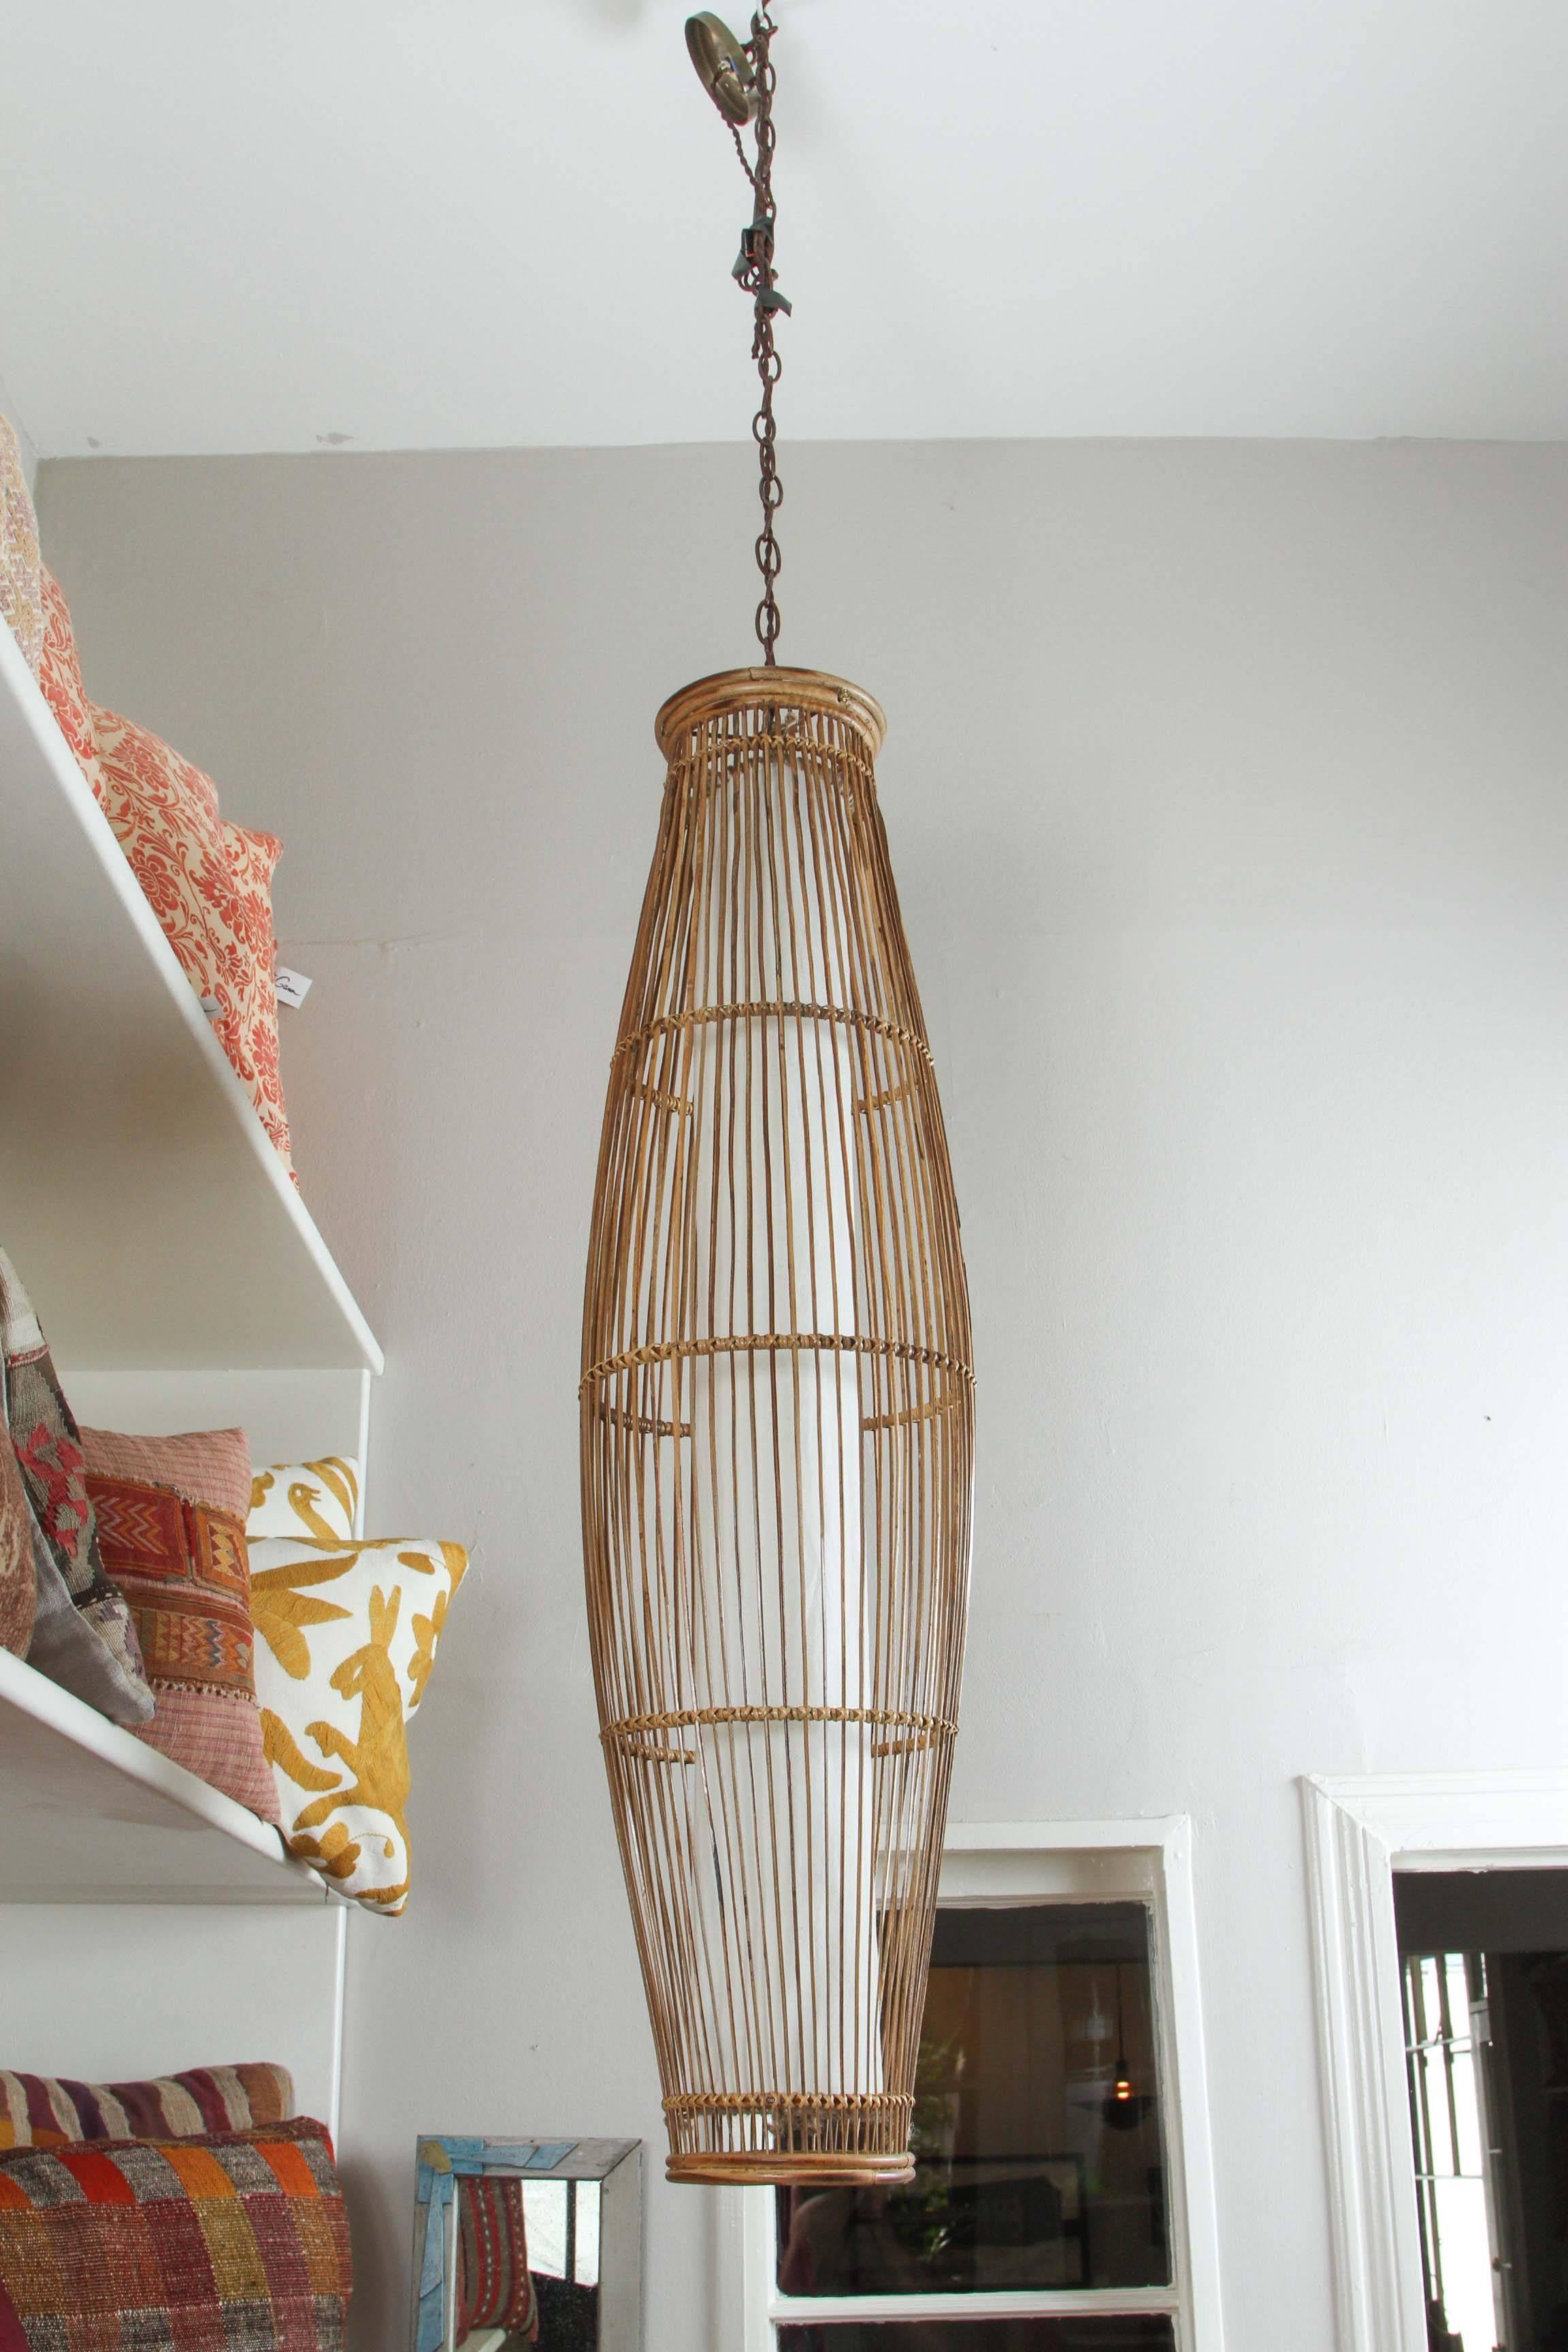 Vintage bamboo light with three sockets inside a white cotton fabric tube. Updated electrical fittings and hardware.